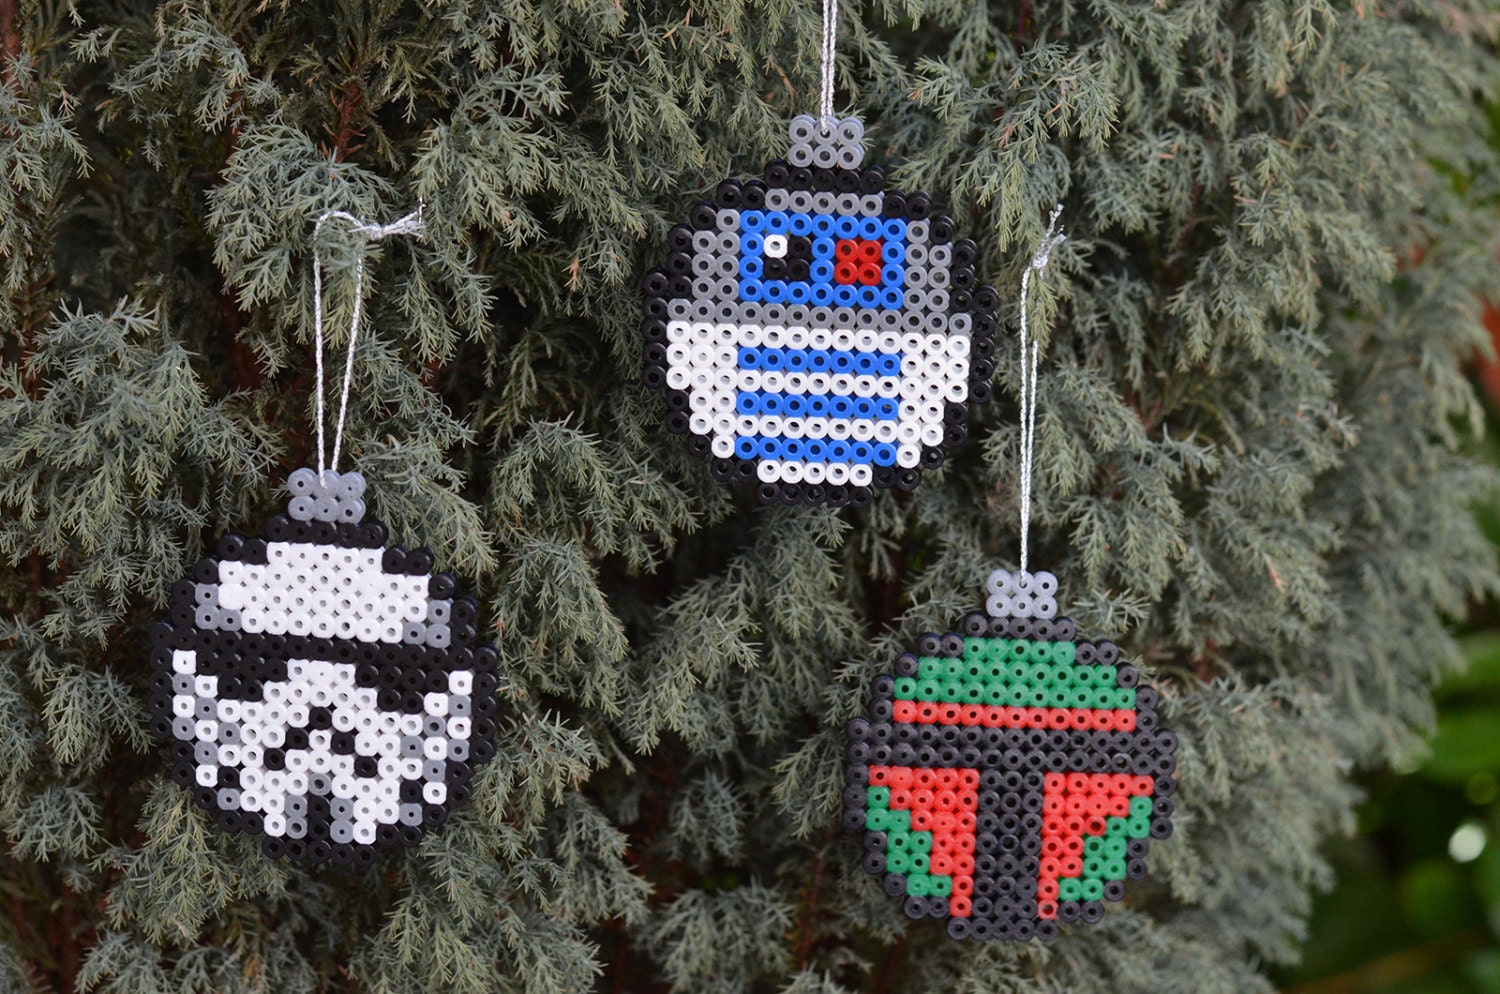 Star Wars christmas ornament in perler beads by PapaGeek on Etsy